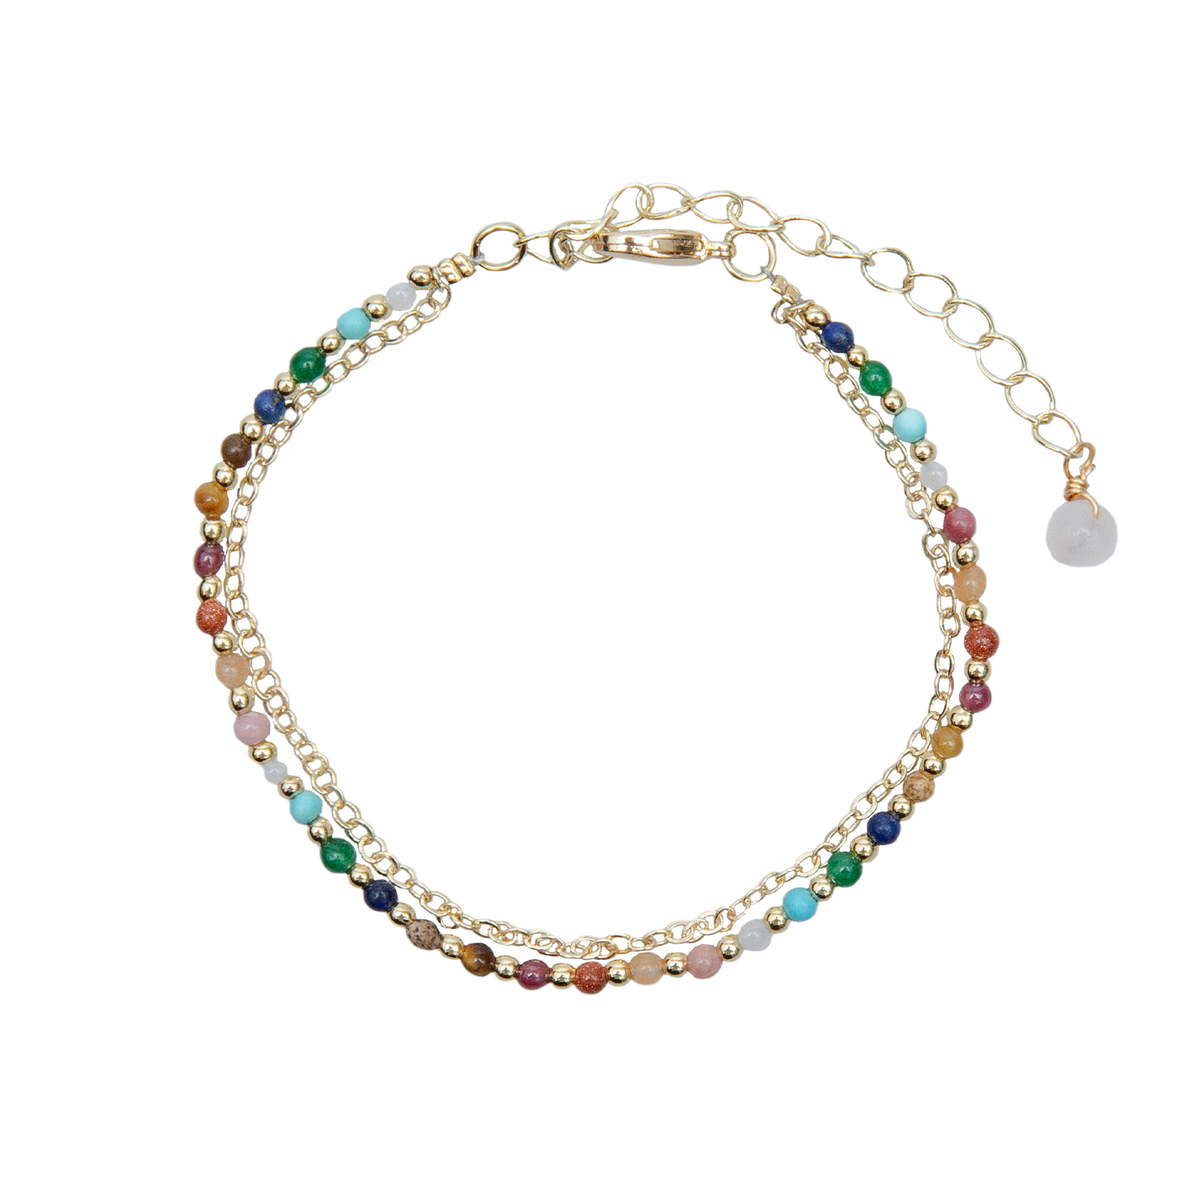 2mm multicolor stone and gold bead healing bracelet with an attached gold chain bracelet